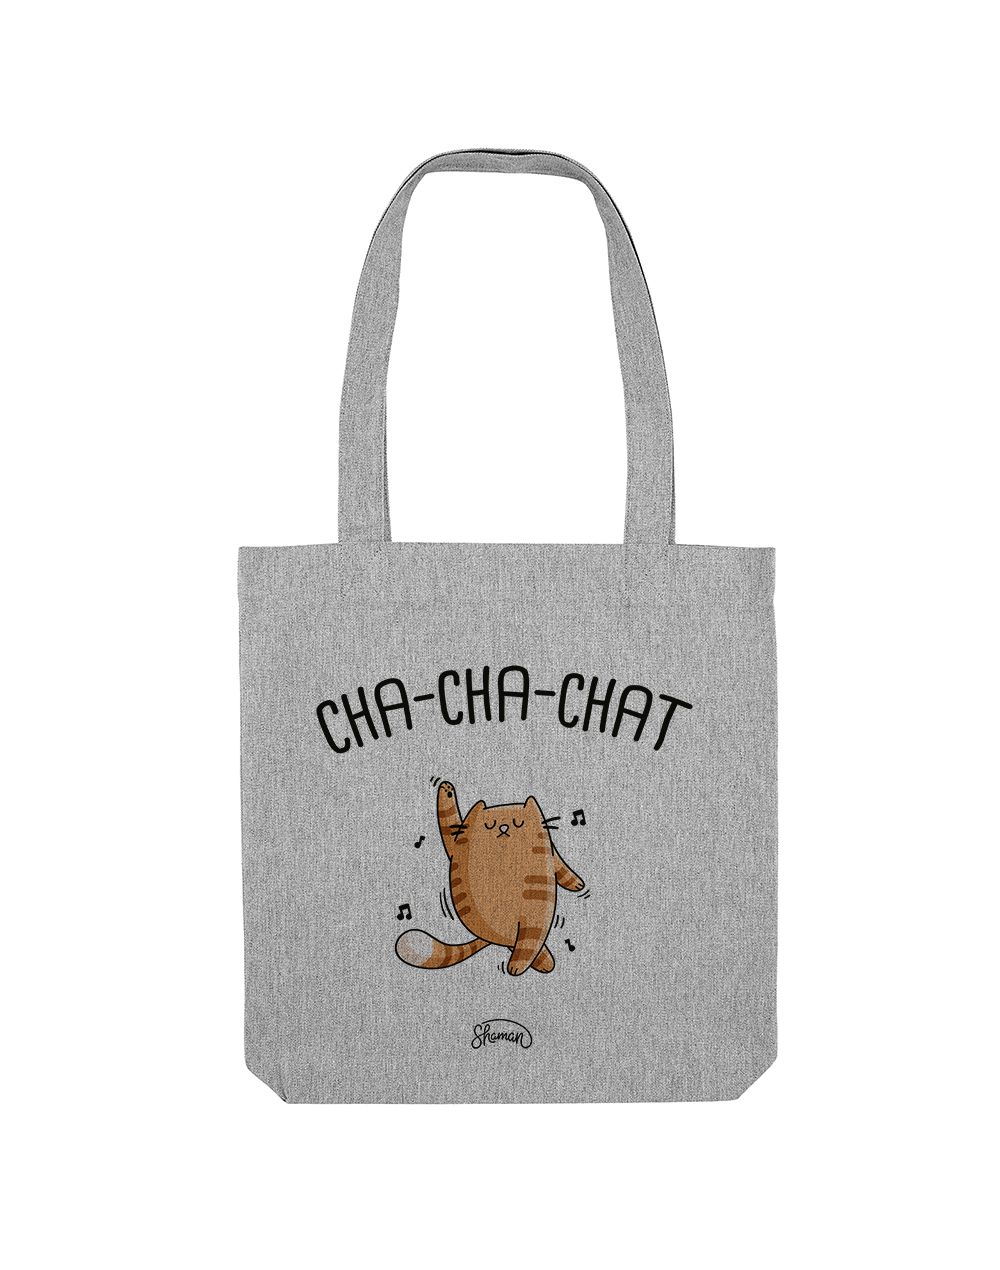 Tote Bag "Chachachat"